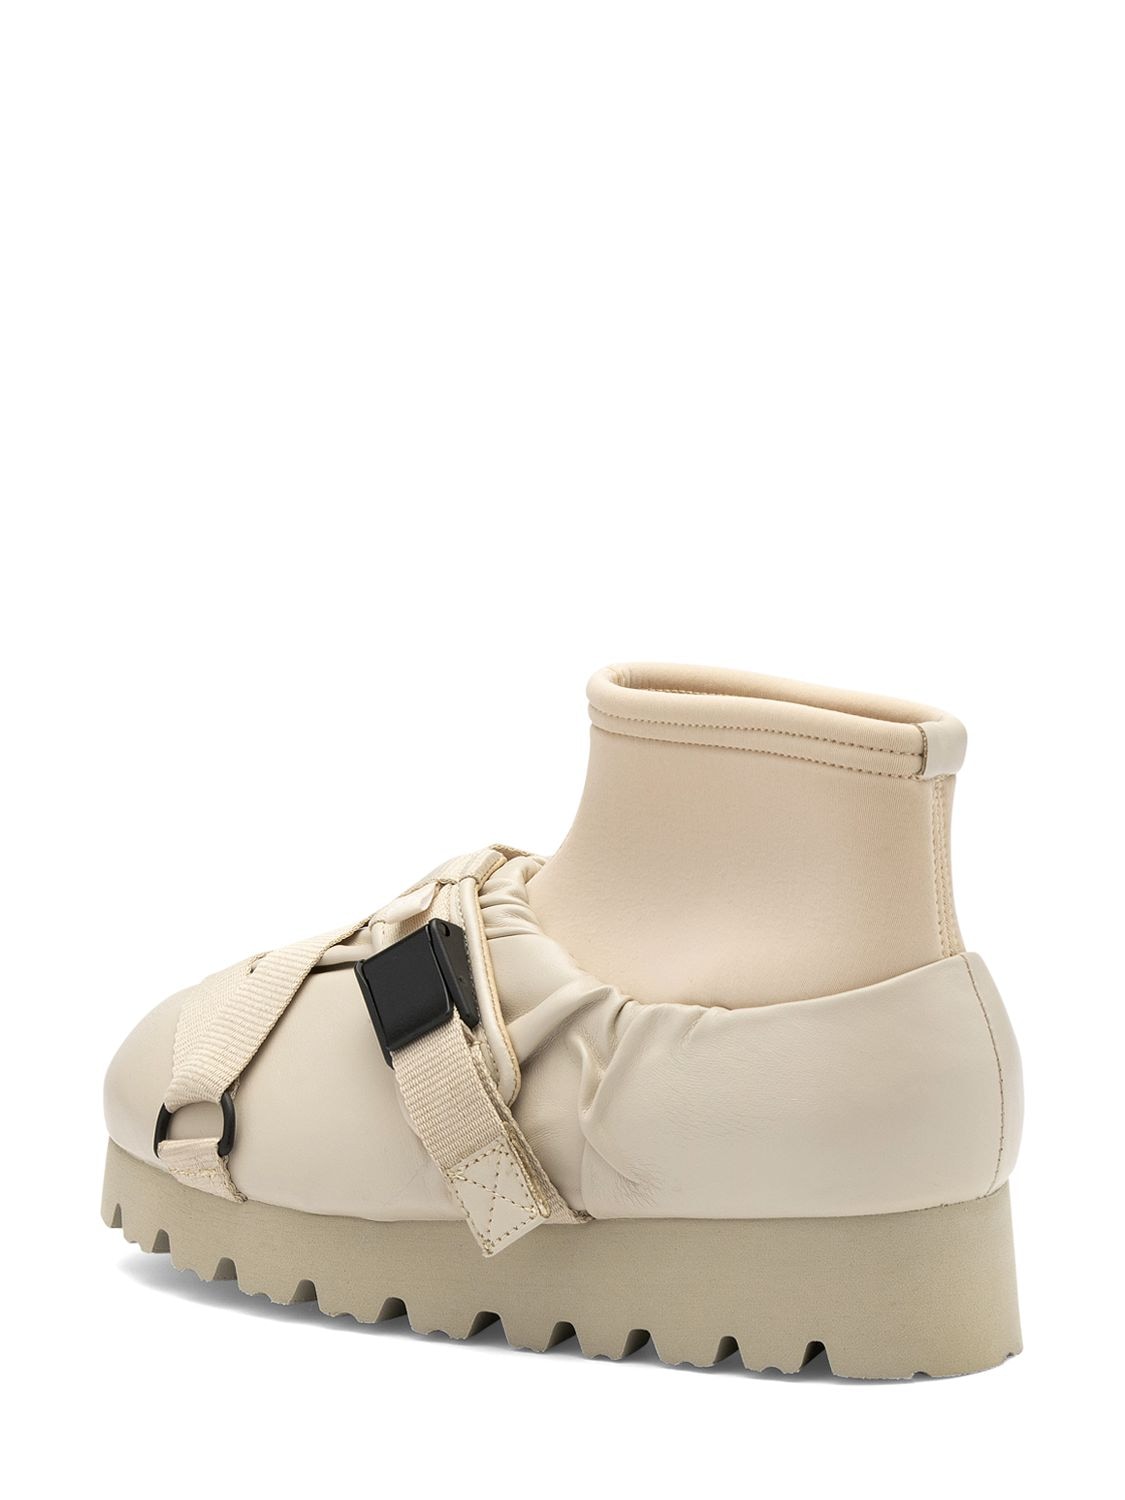 Shop Yume Yume Camp High Faux Leather Shoes In Beige